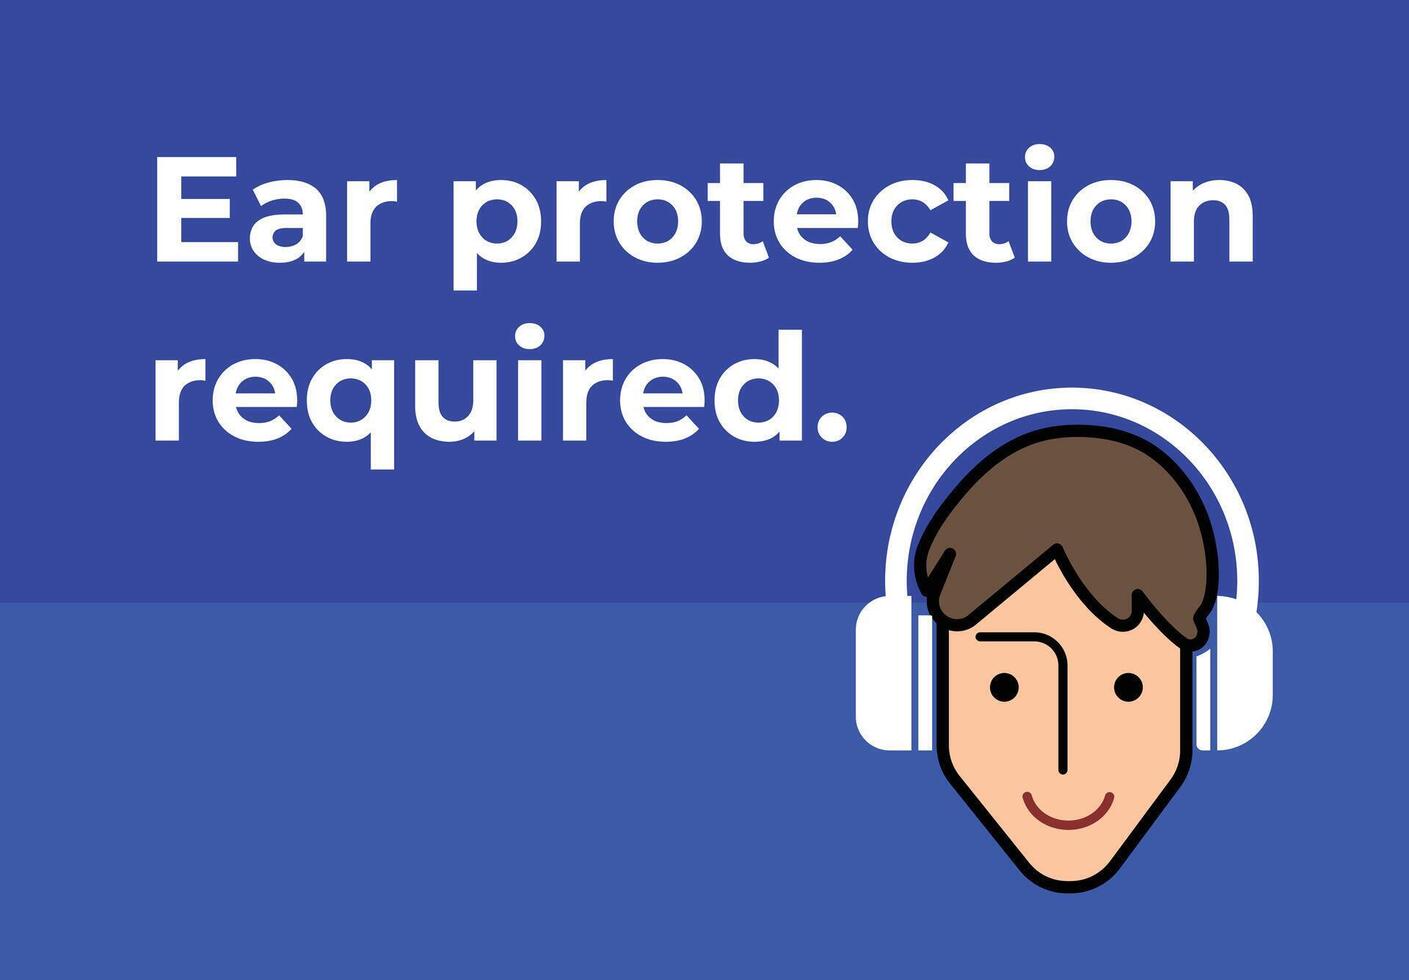 Ear muffs protection required sign age poster design illustration isolated on horizontal blue background. Simple flat safety graphic design poster cartoon drawing. vector